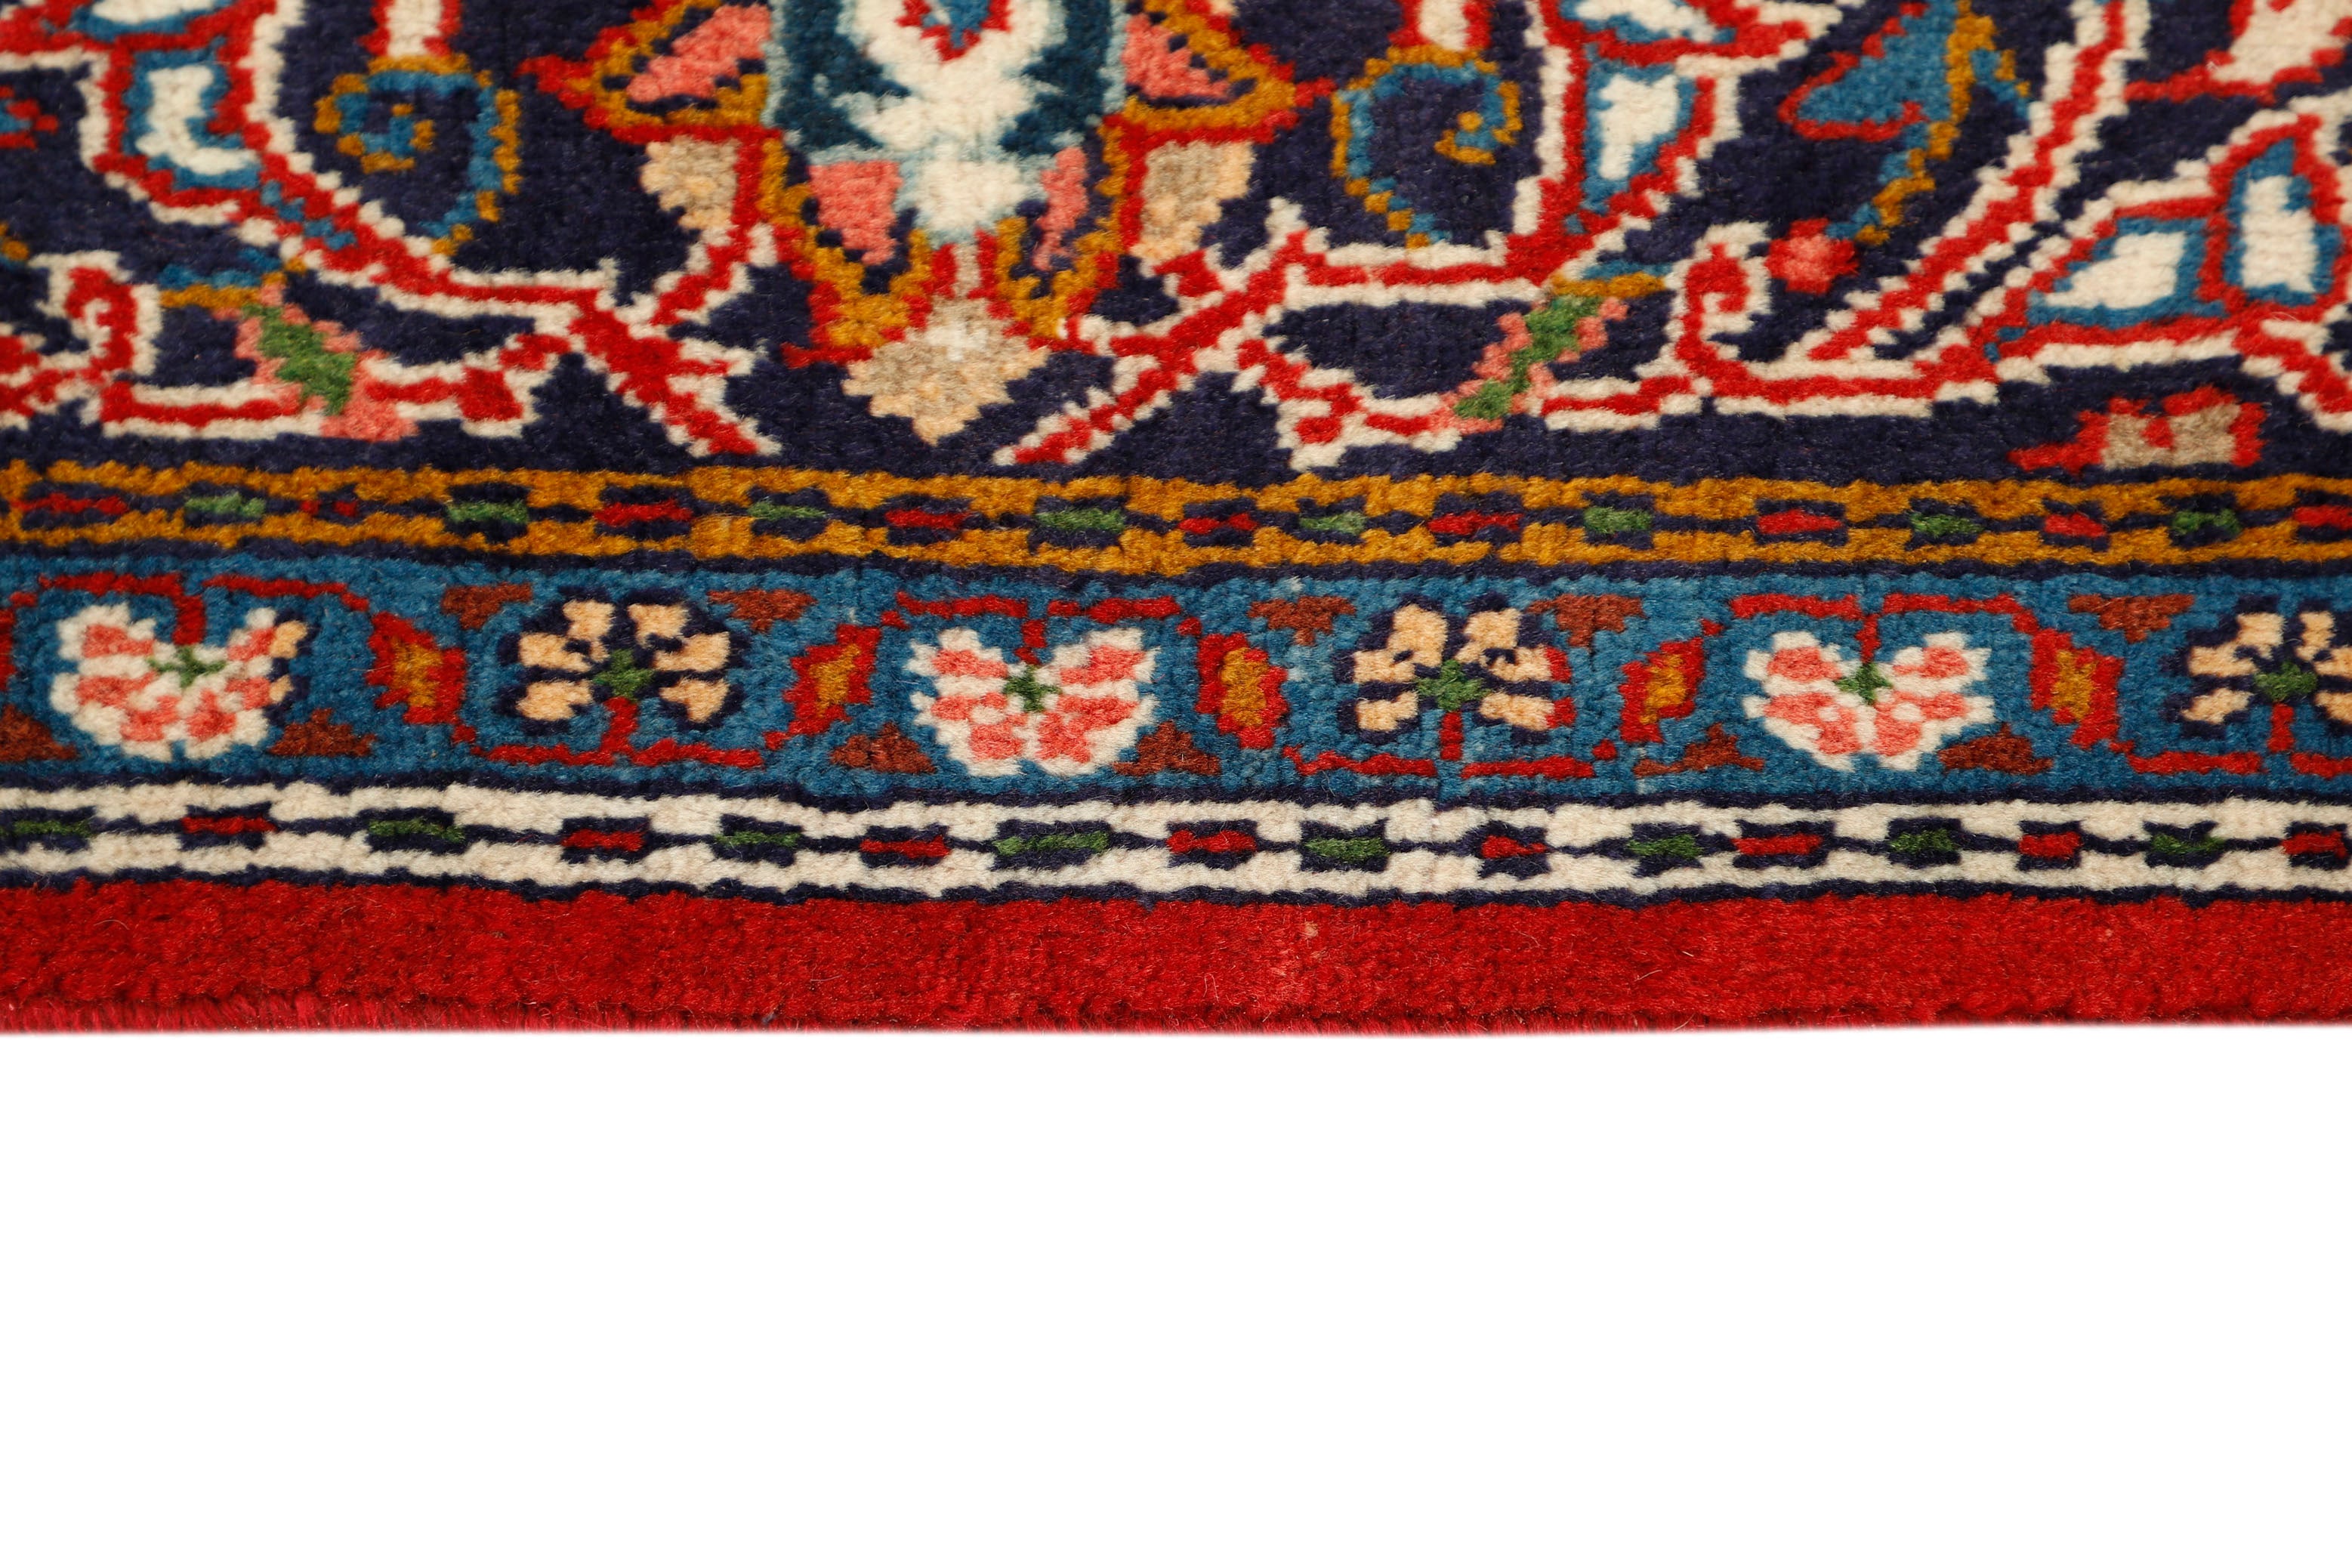 Authentic persian rug with traditional tribal geometric pattern in red and black